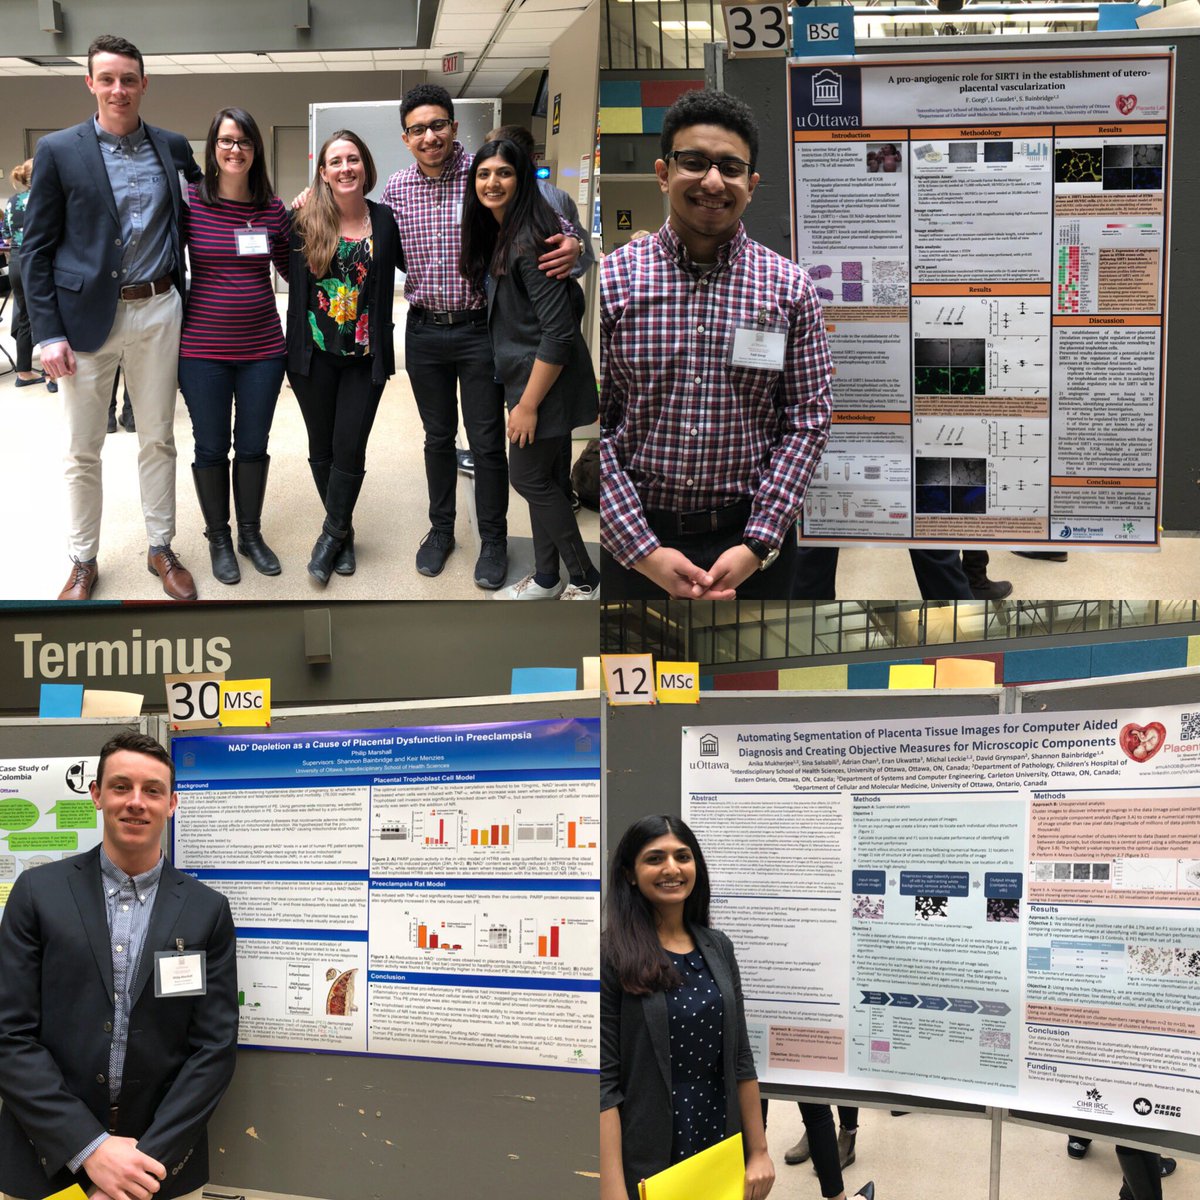 @PlacentaLab representing well at ISHS Research Day. Great job ladies and gents! #proudlabmom #placentasquad #universityofottawa #healthsciences